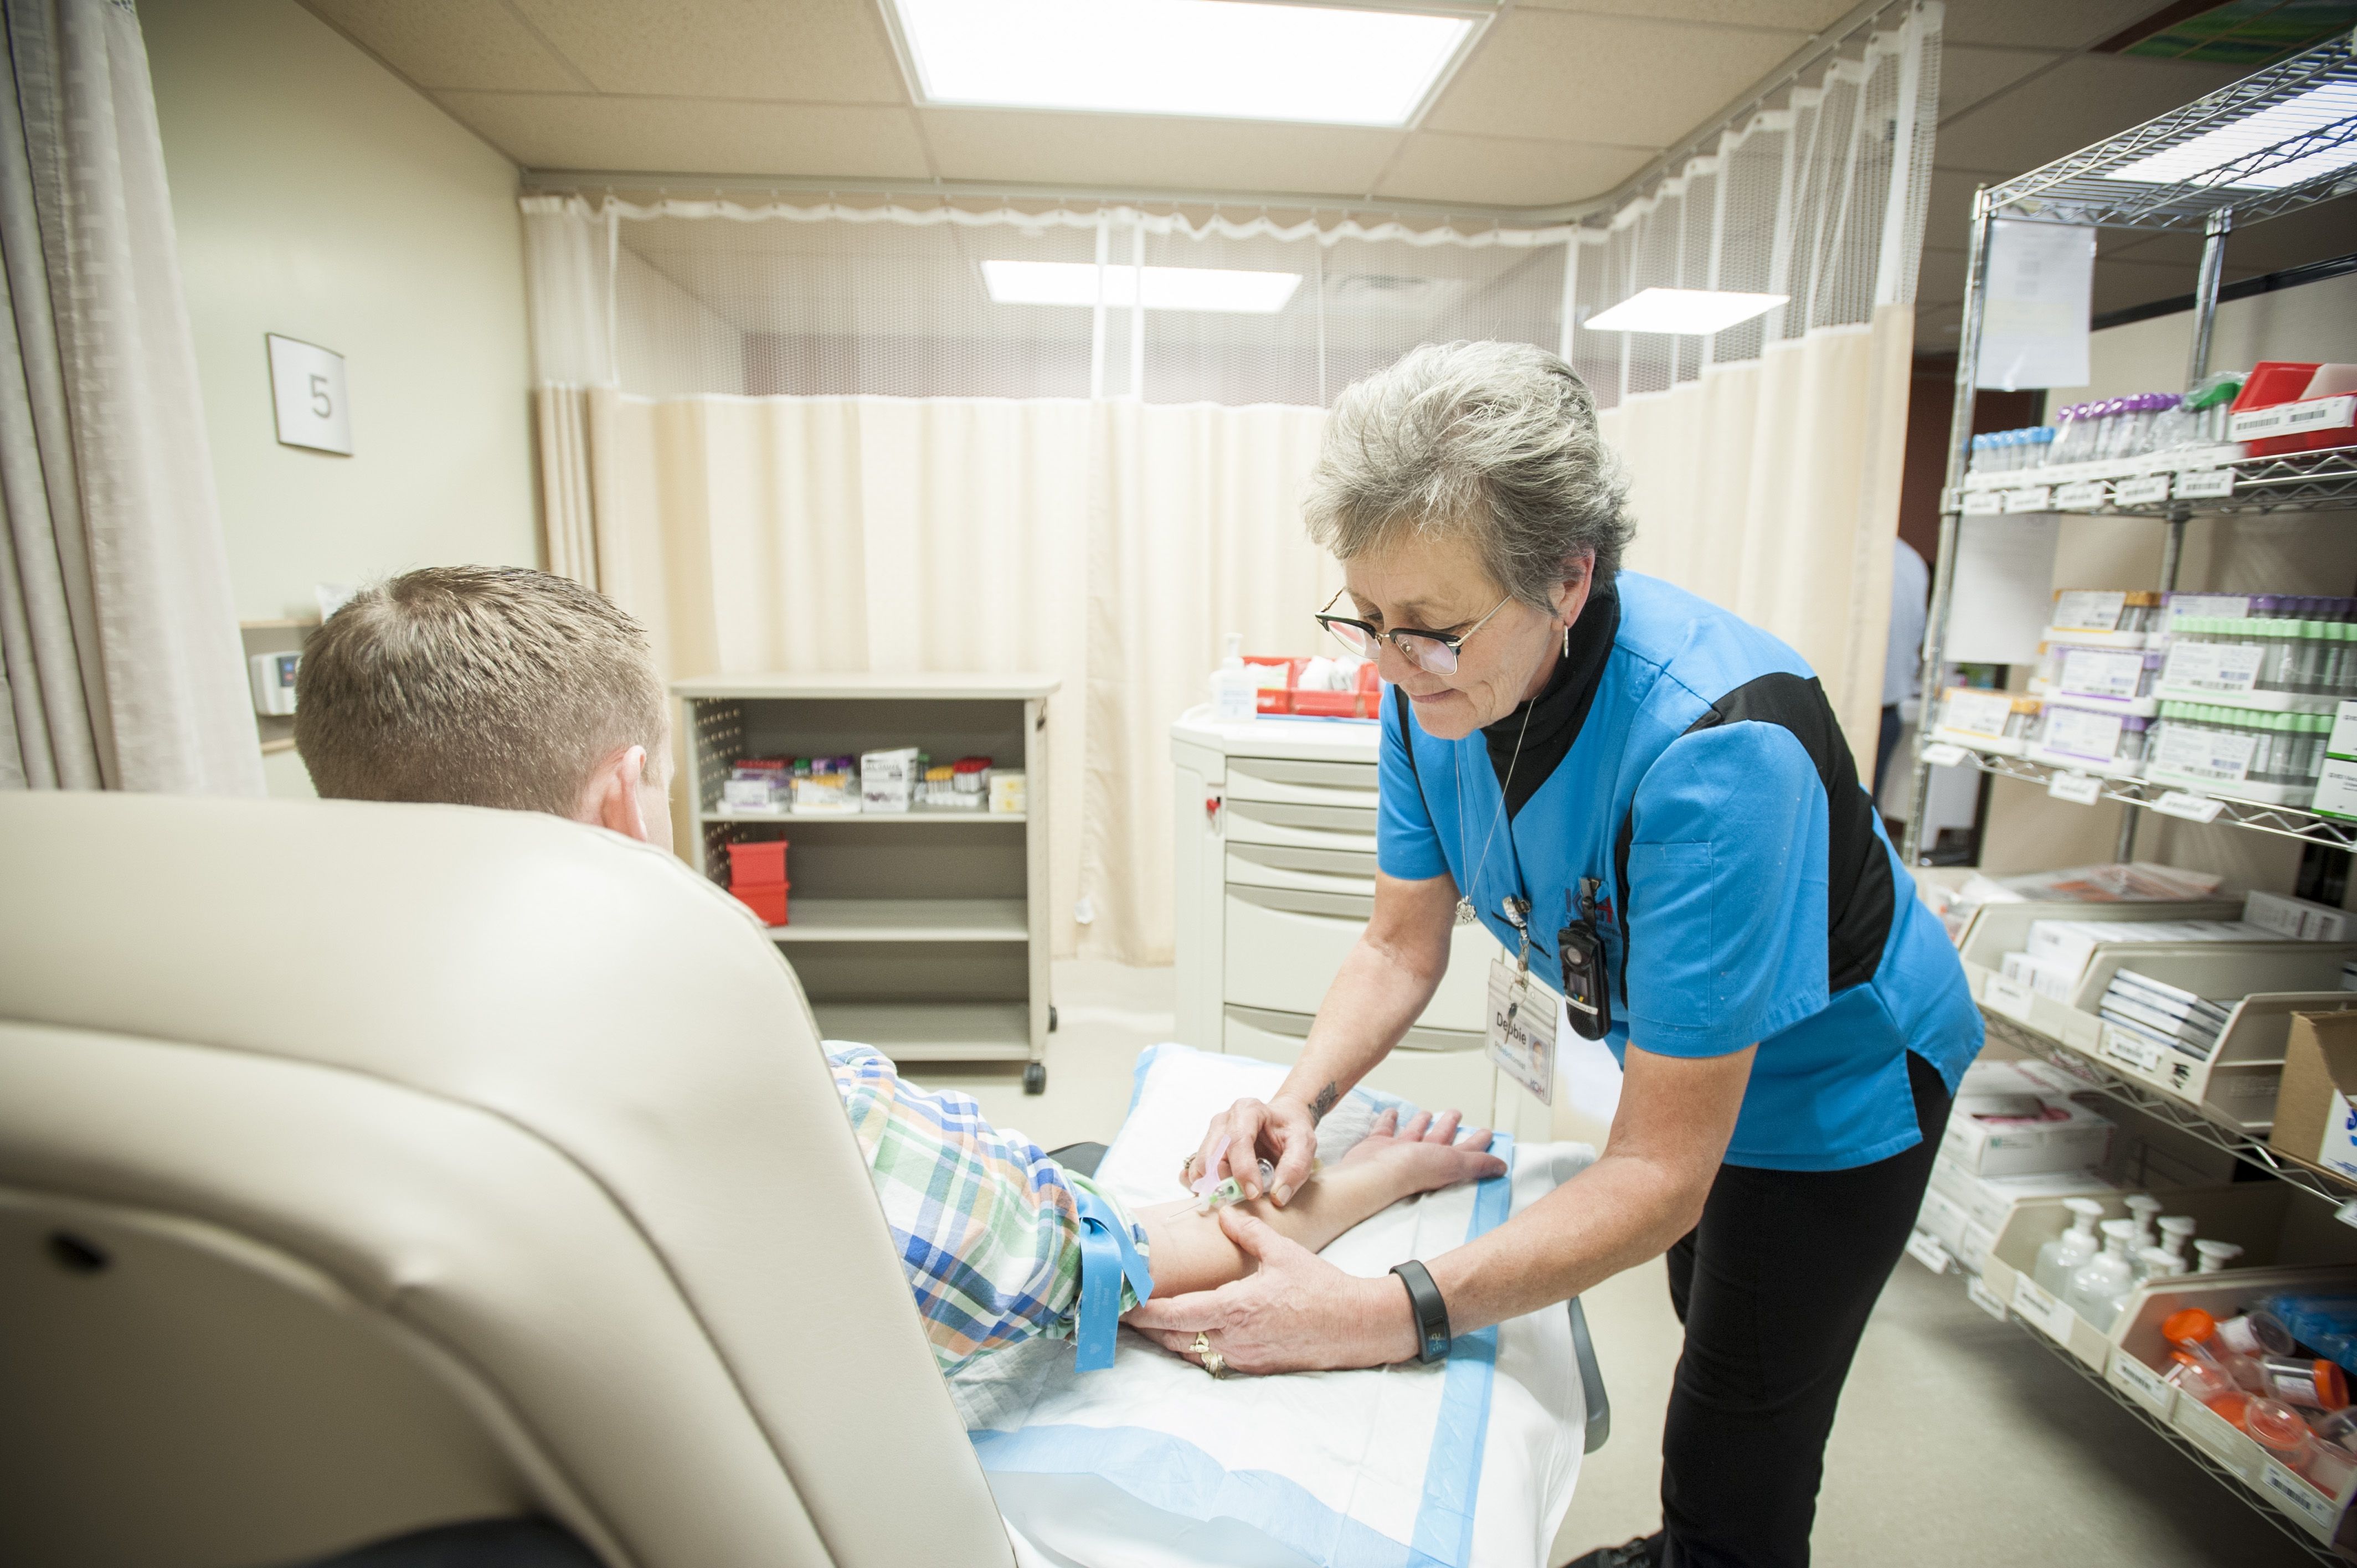 Phlebotomist Deb Webster at work in one of the stations in the relocated Blood Room in the Burr wing lobby.